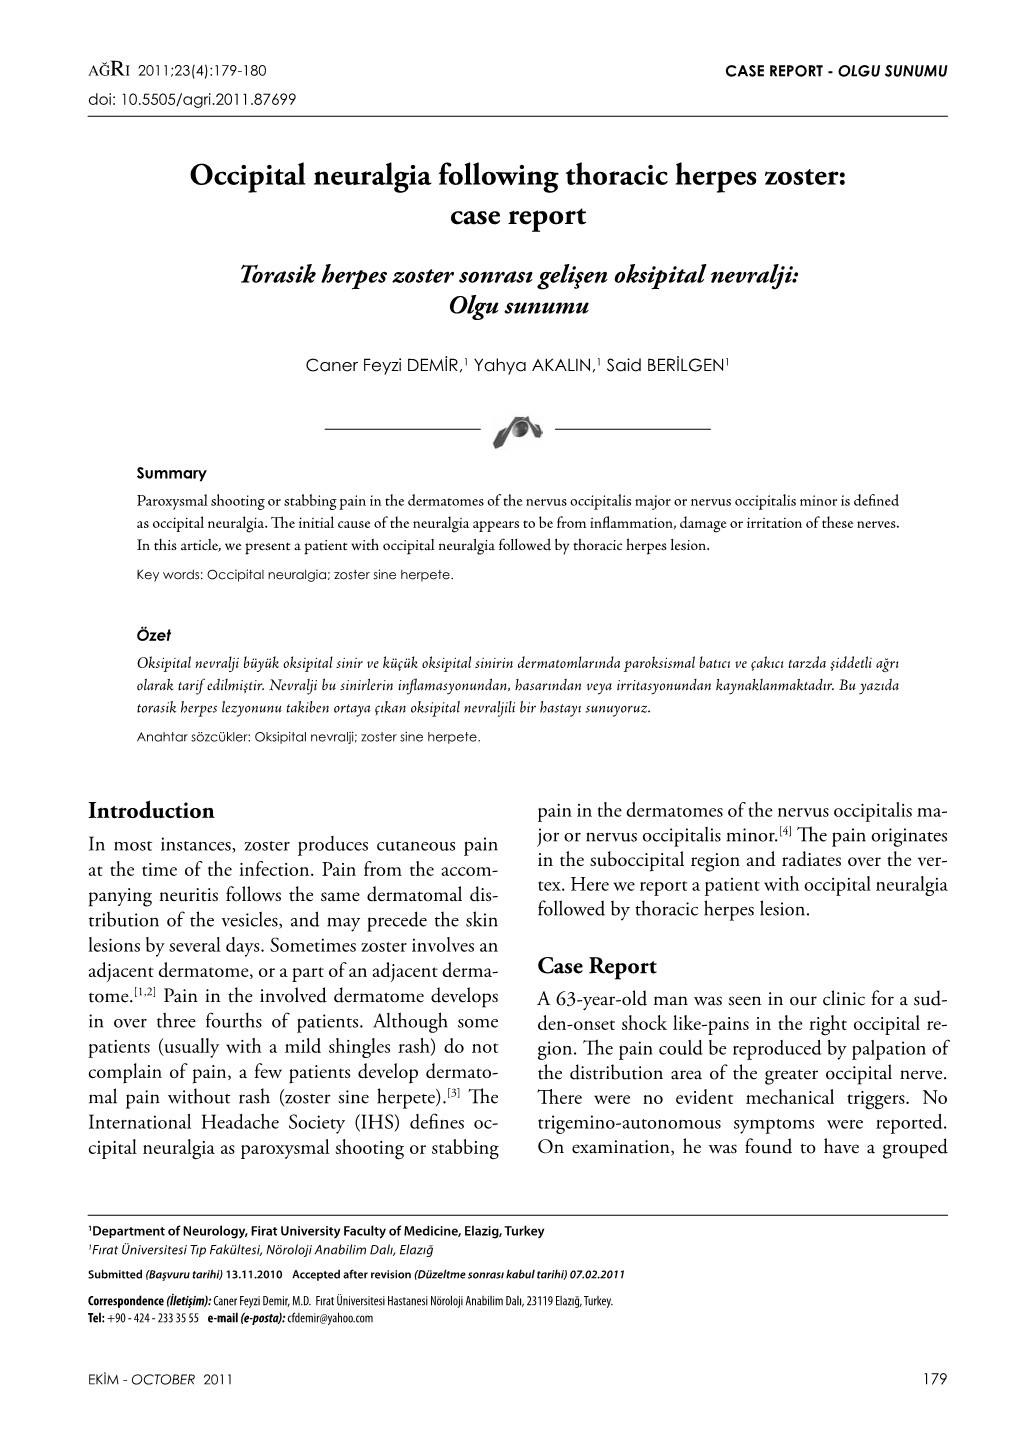 Occipital Neuralgia Following Thoracic Herpes Zoster: Case Report